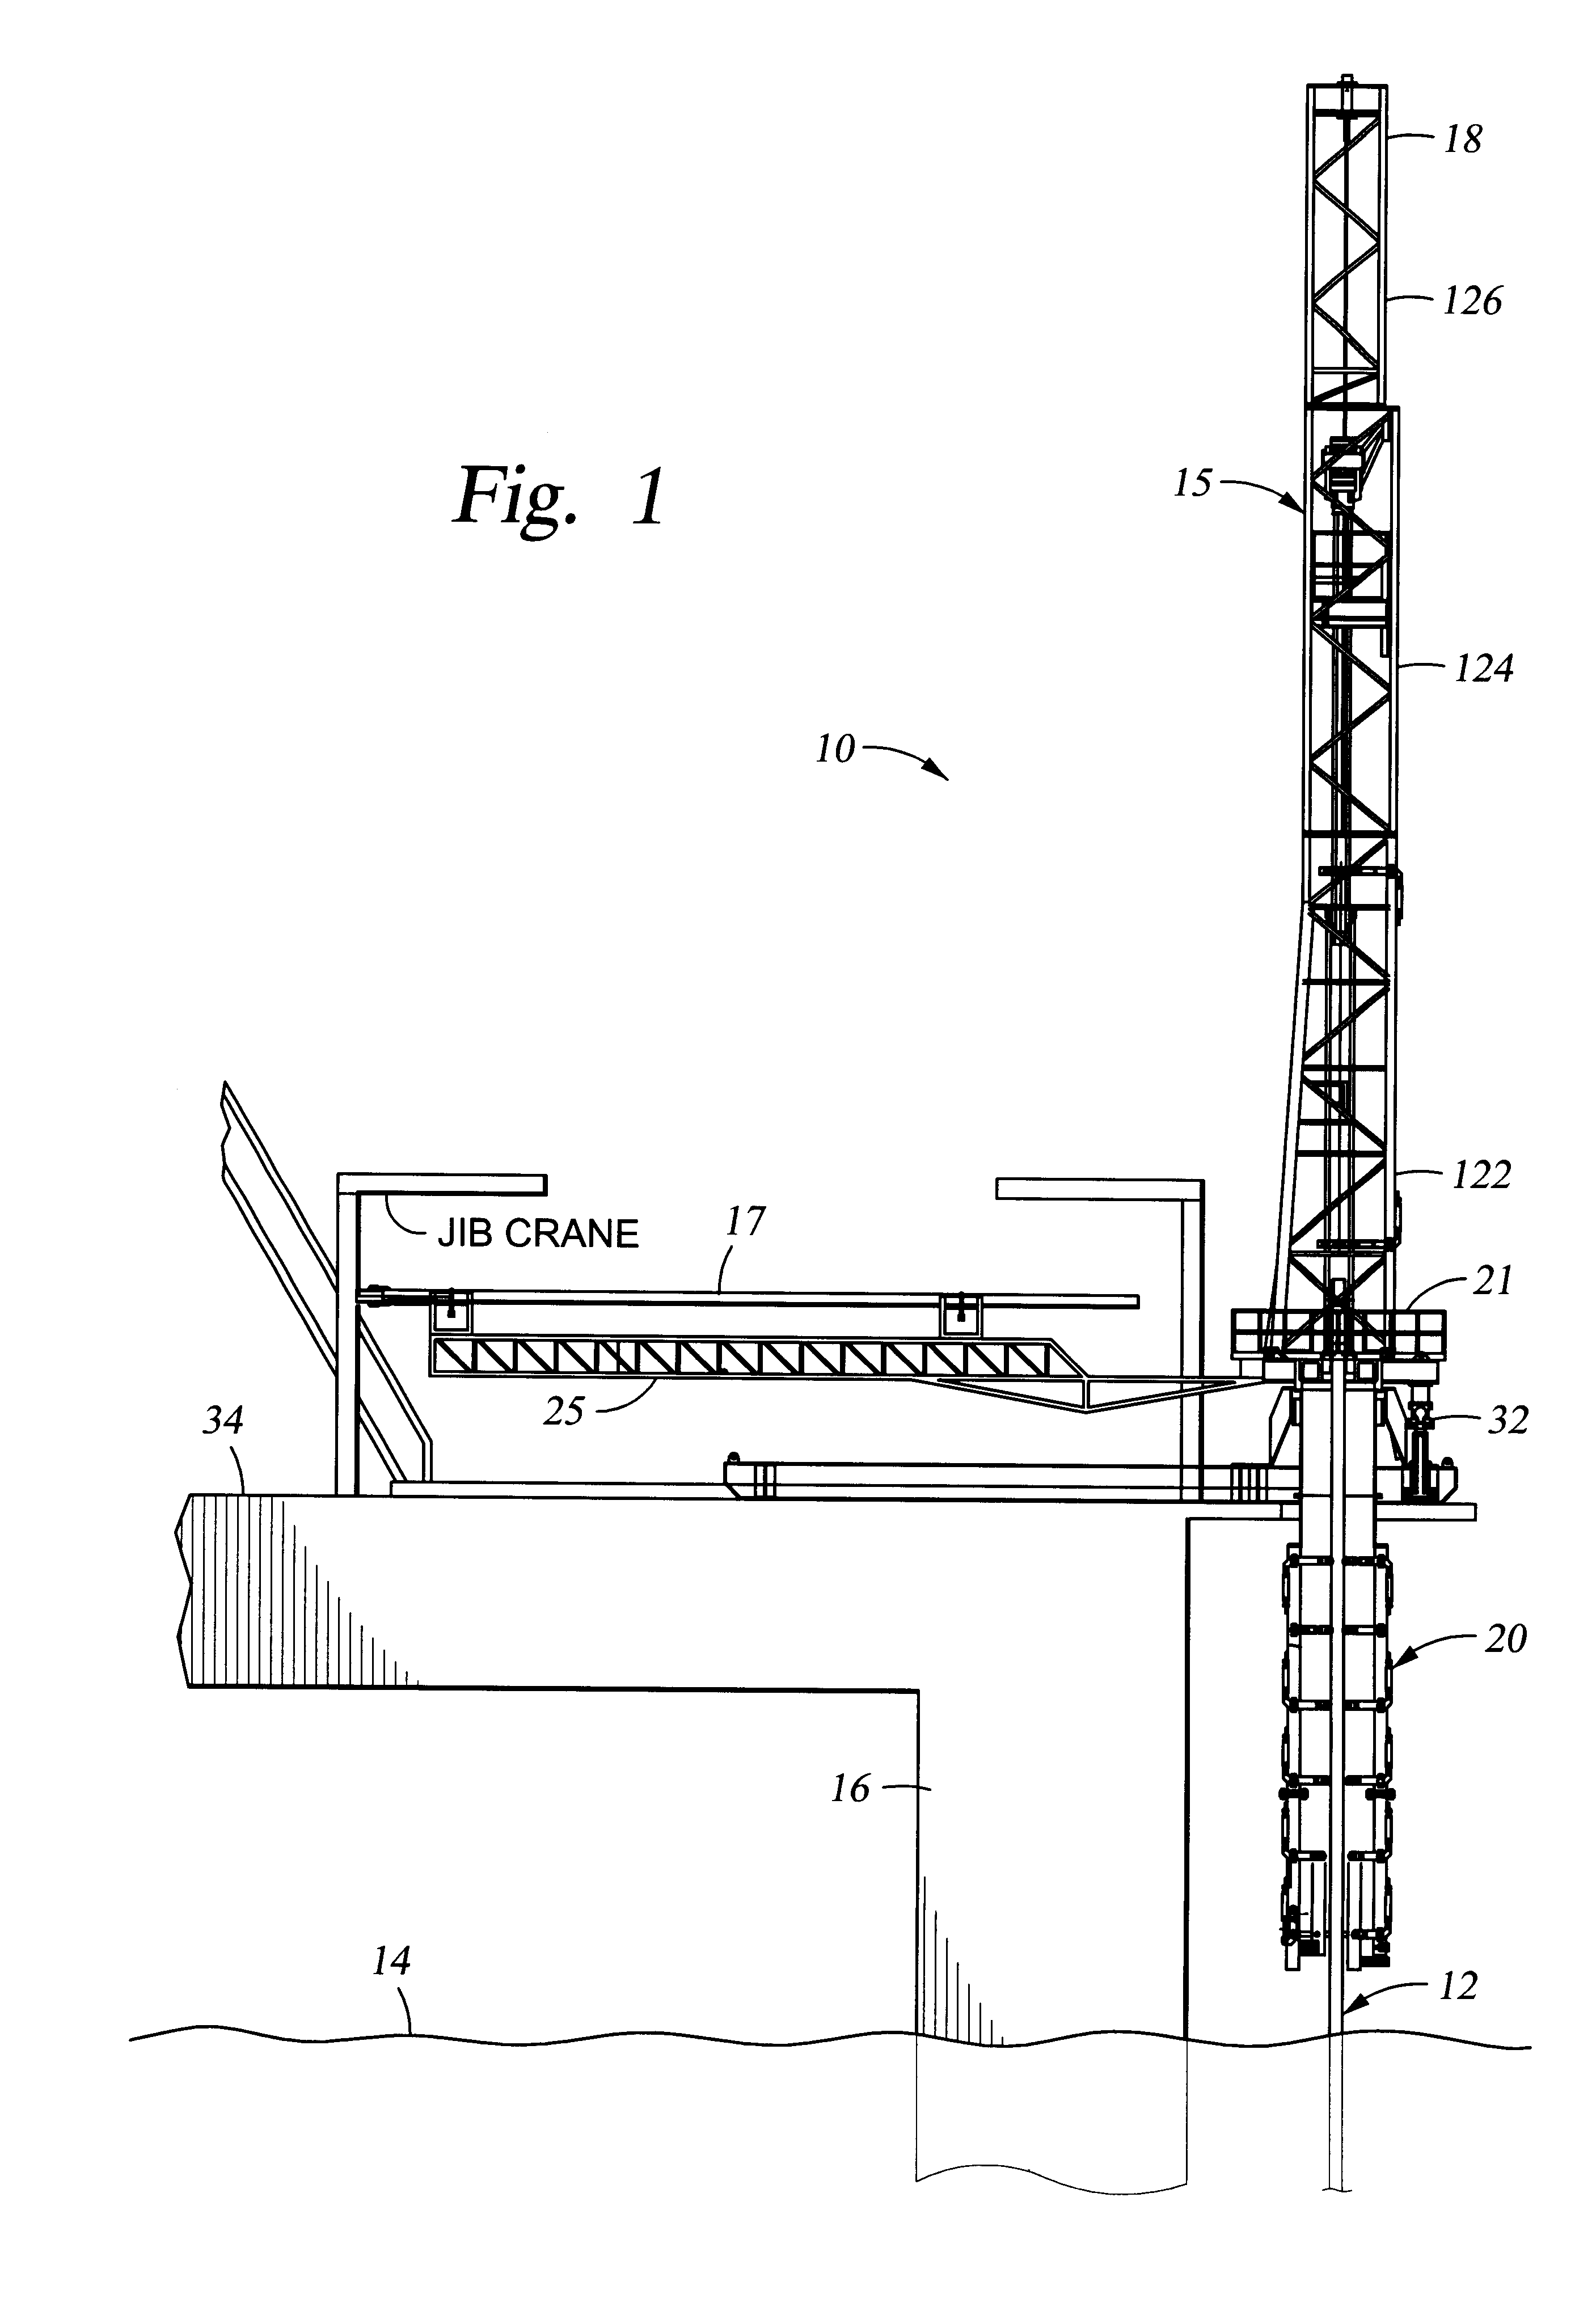 Apparatus for deploying an underwater pipe string